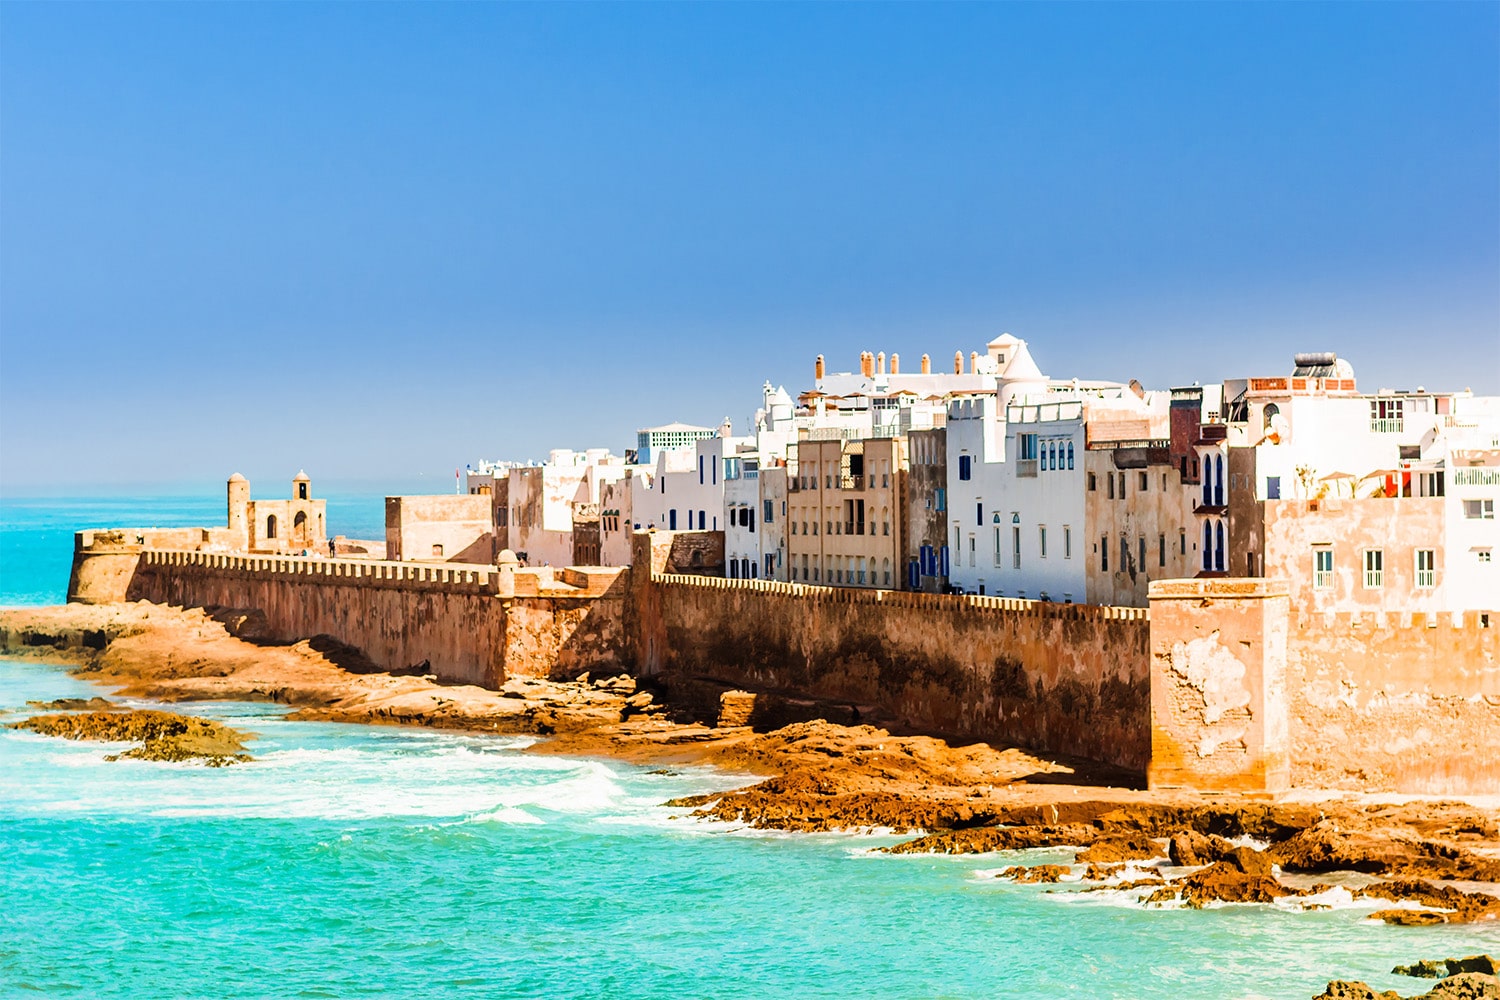 30 interesting facts about Morocco